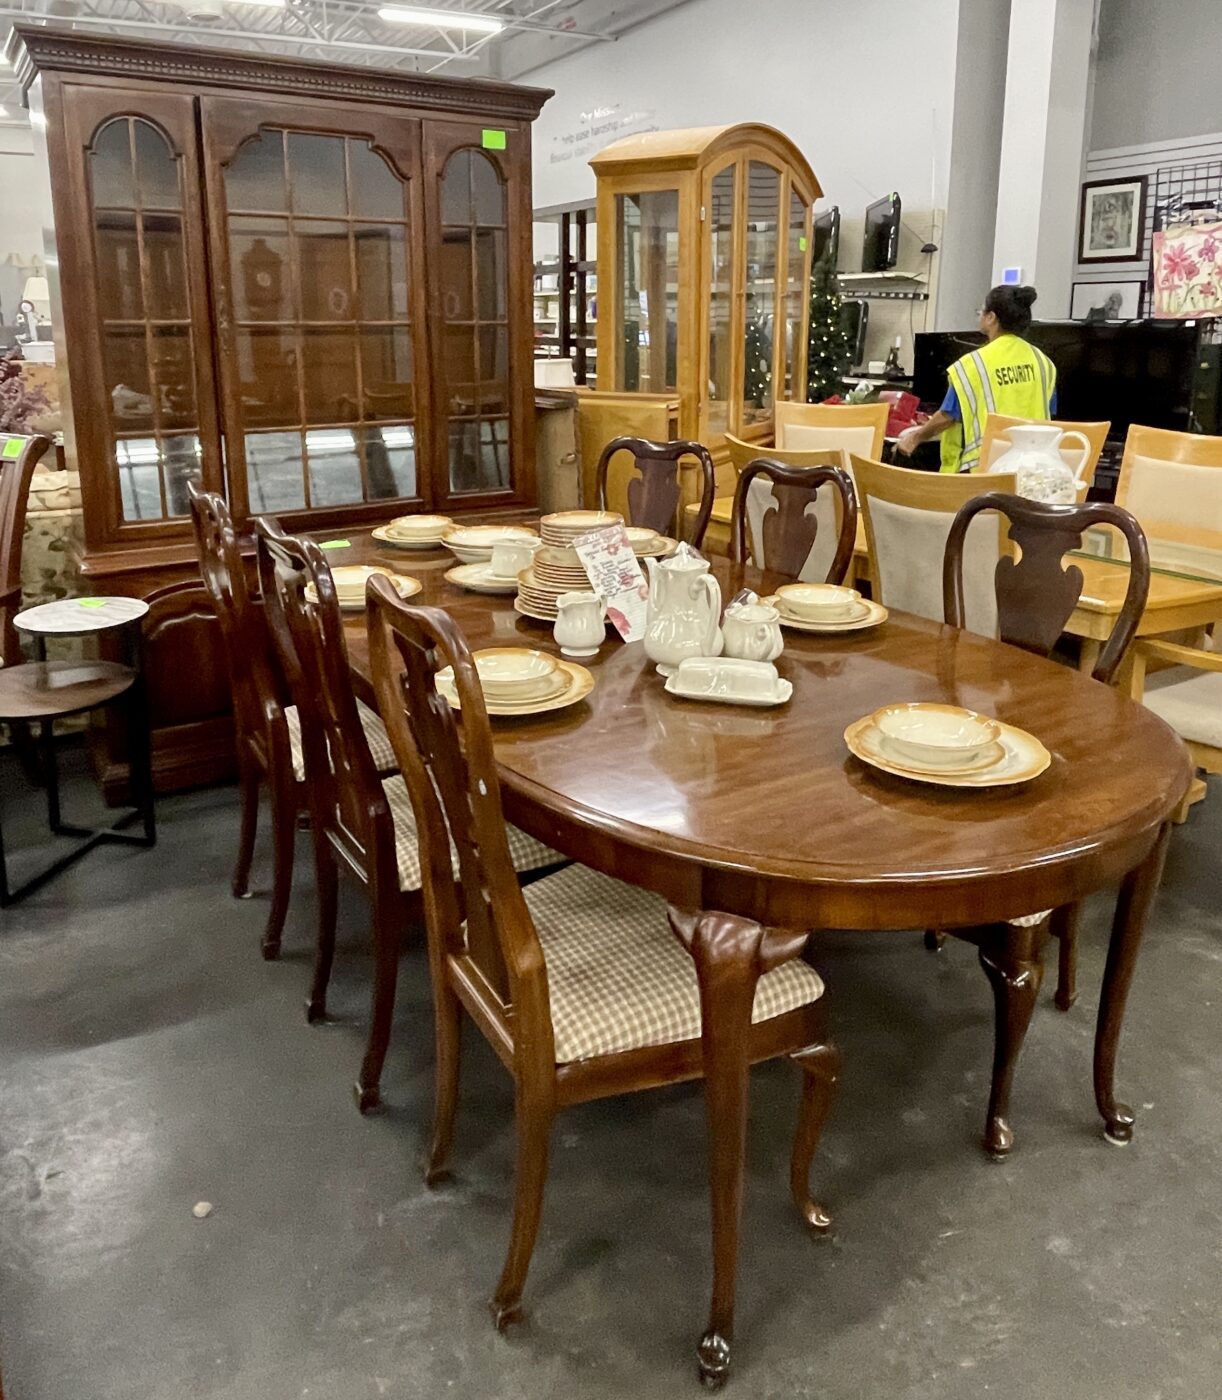 Where Can I Donate A Dining Room Set